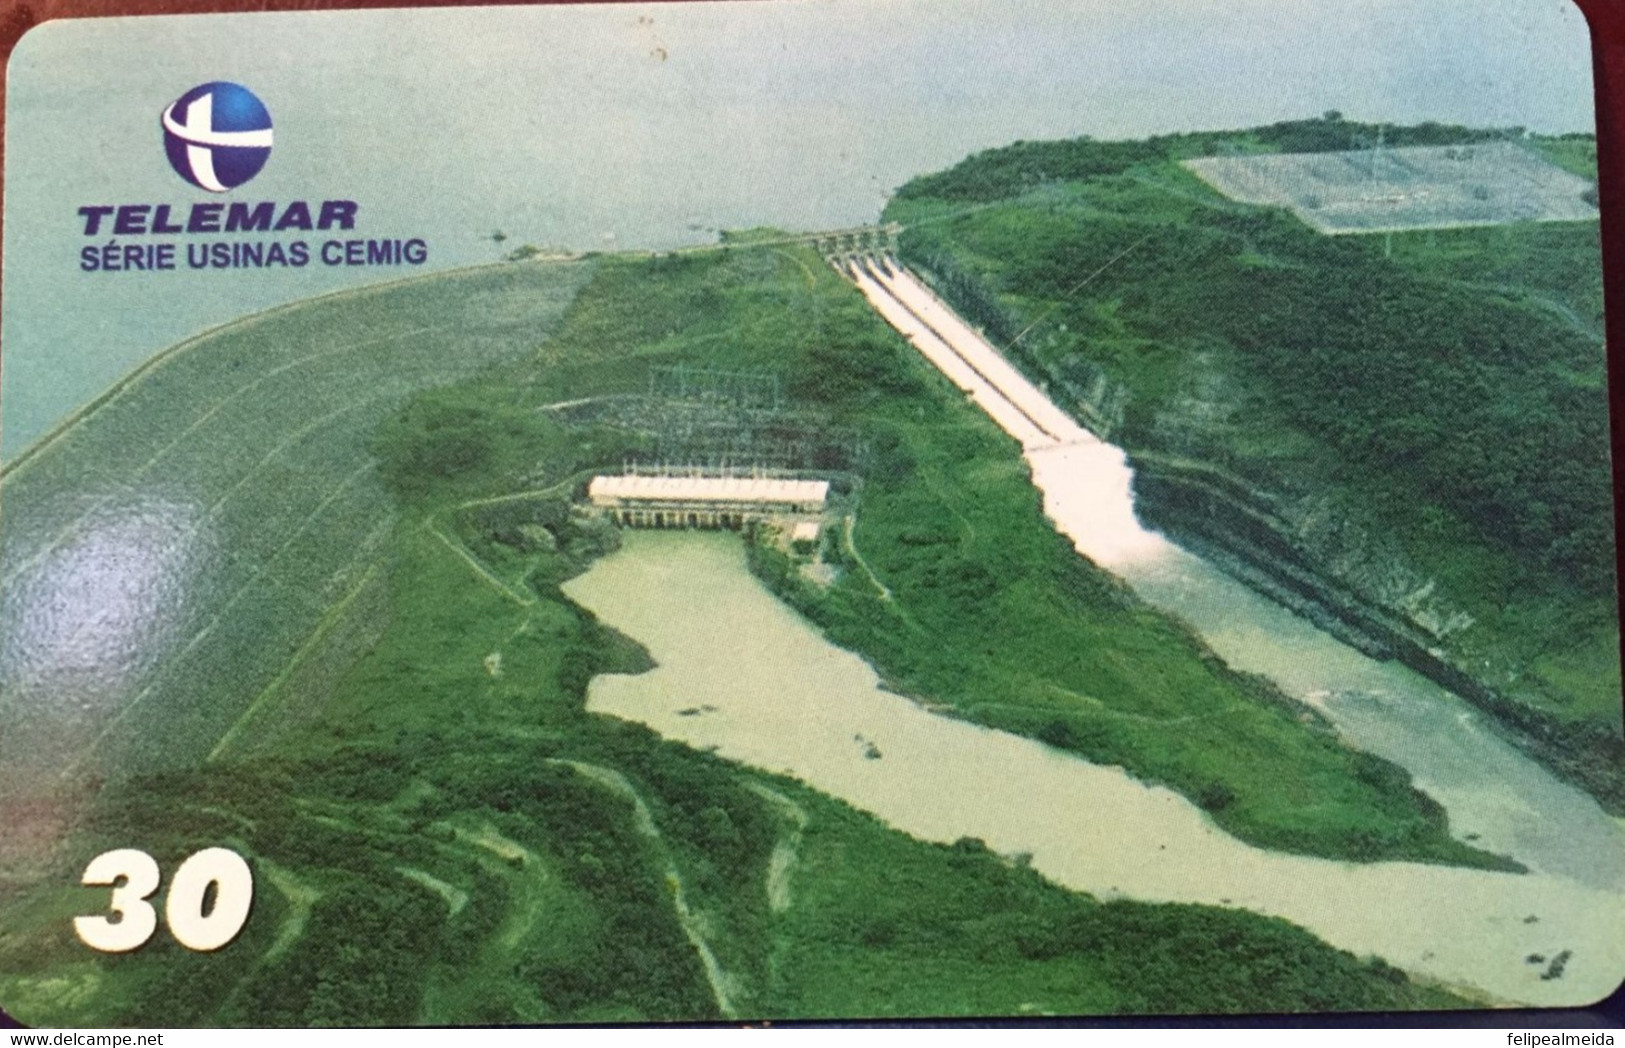 Phone Card Manufactured By Telemar In 2001 - Usinas Cemig Series Emborcação Hydroelectric Plant - Araguari - Minas G - Mountains